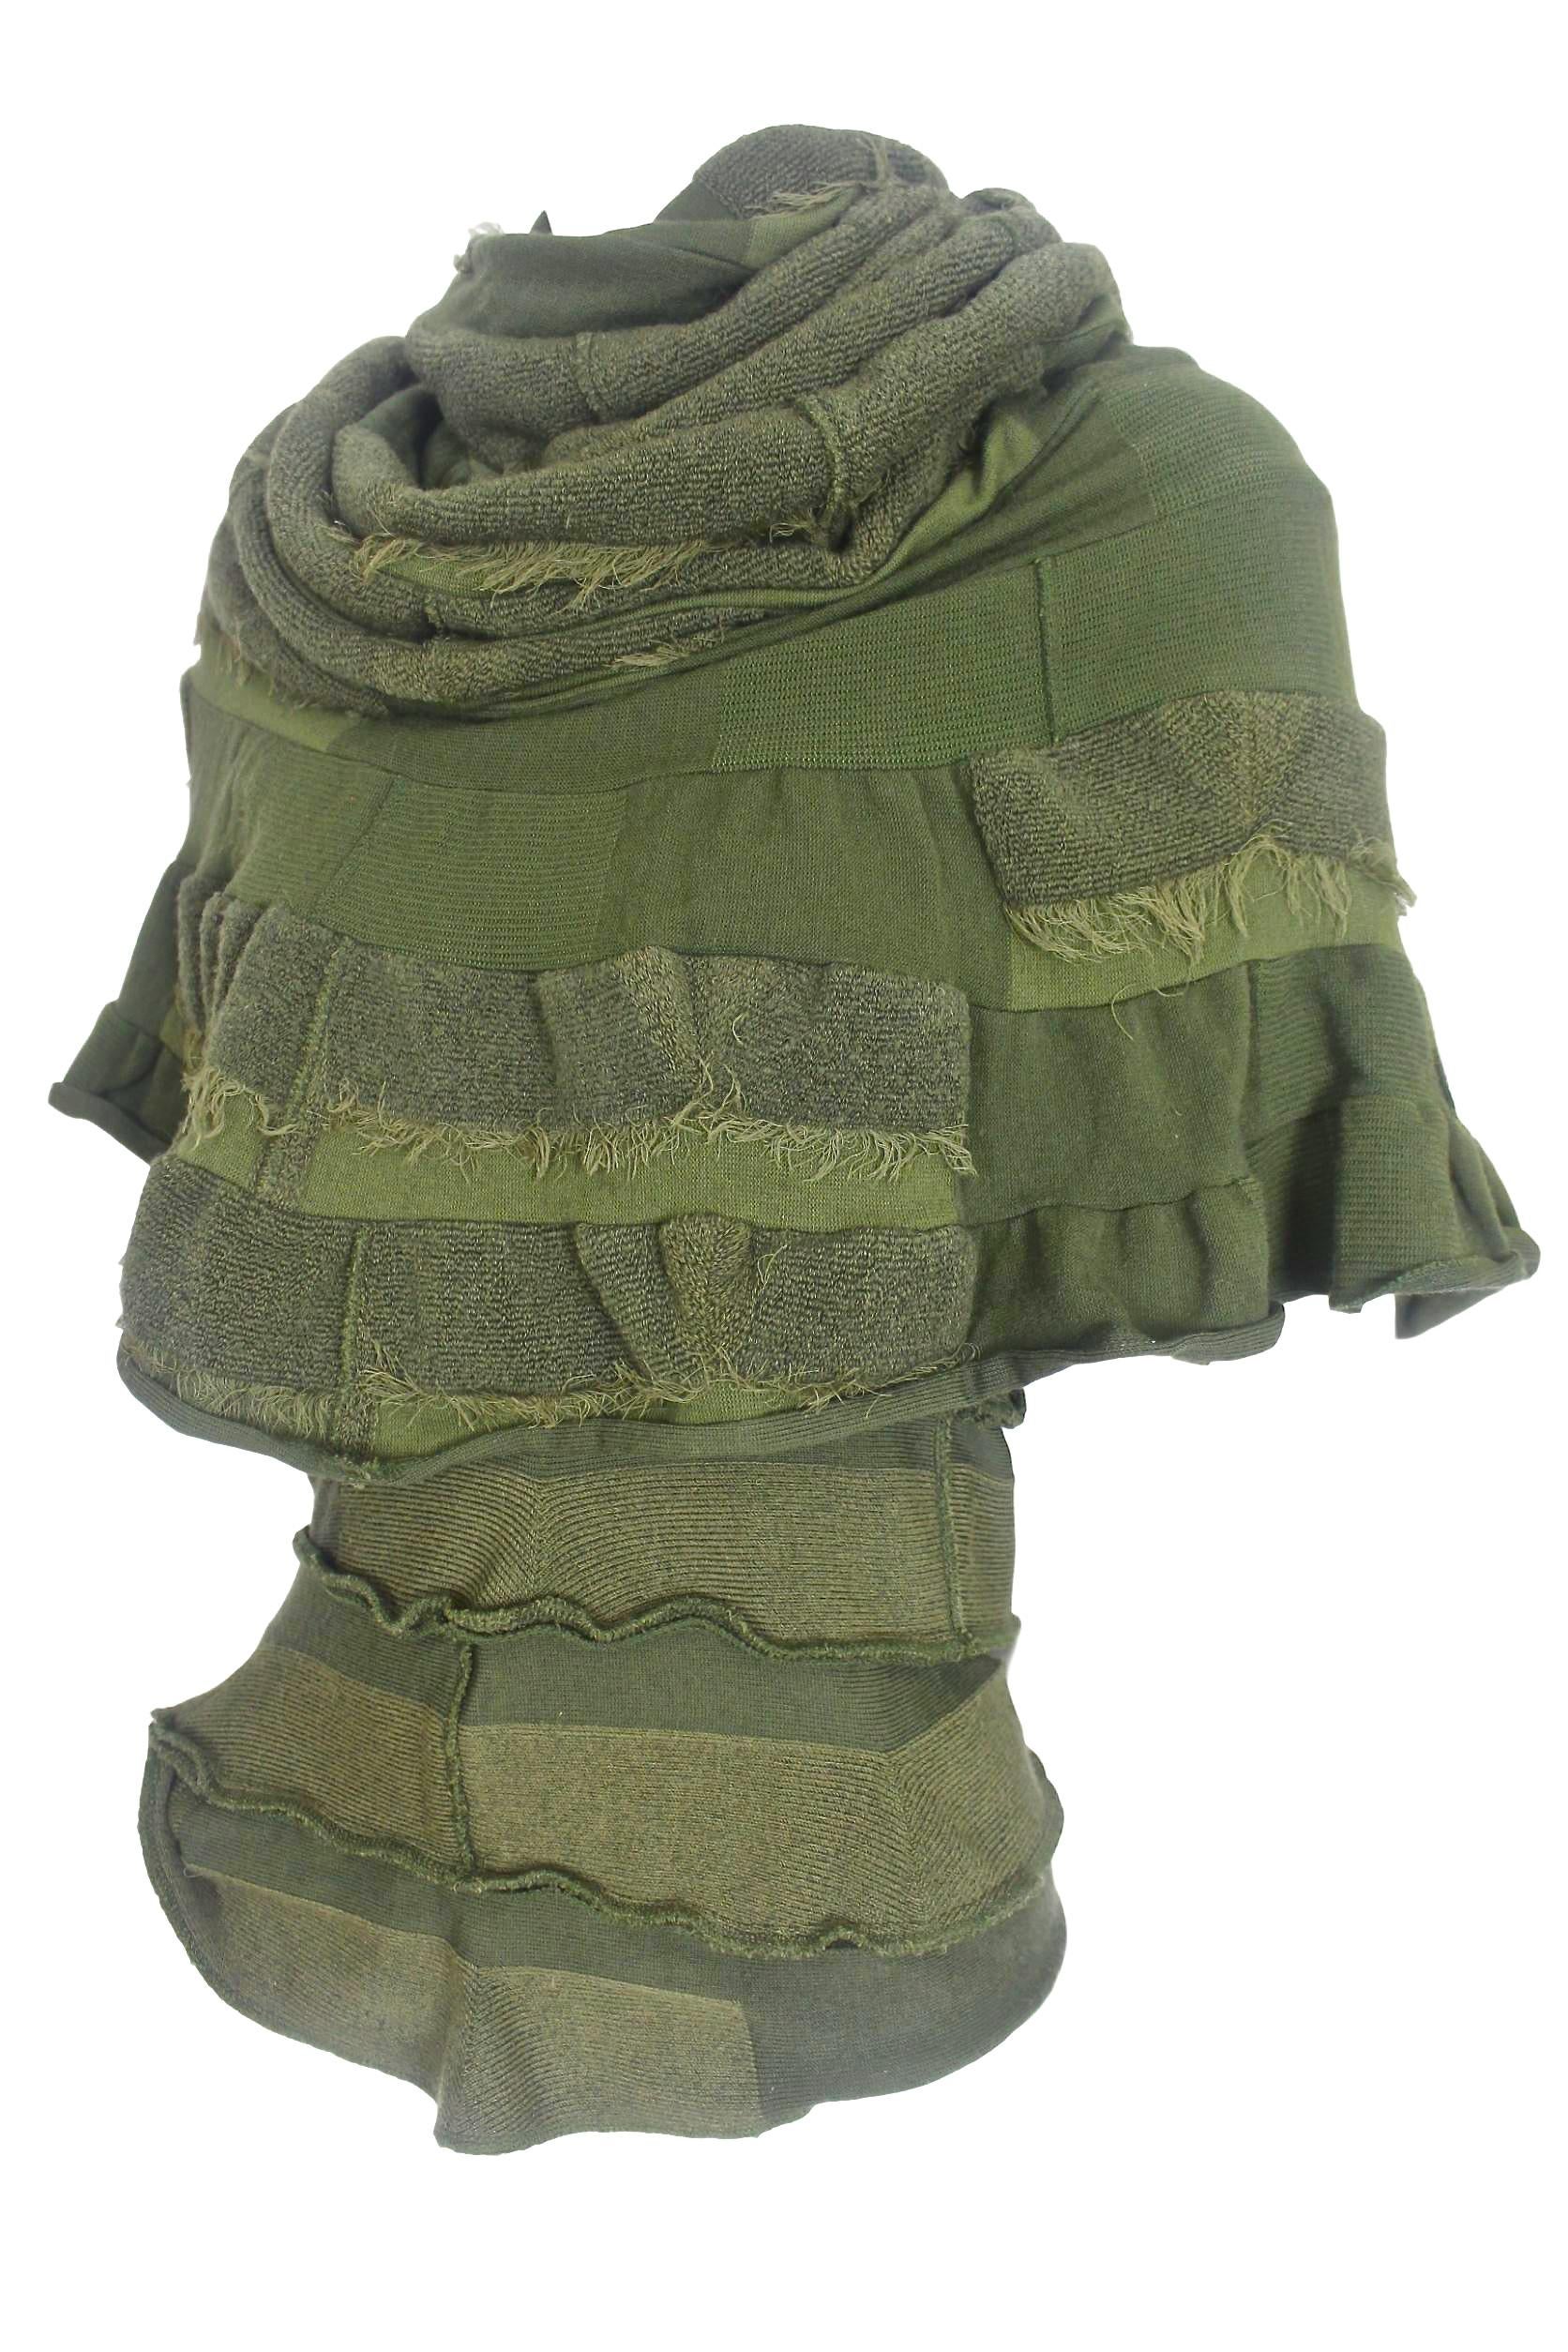 Comme des Garçons Junya Watanabe 2006 Collection Military Knitted Poncho 6